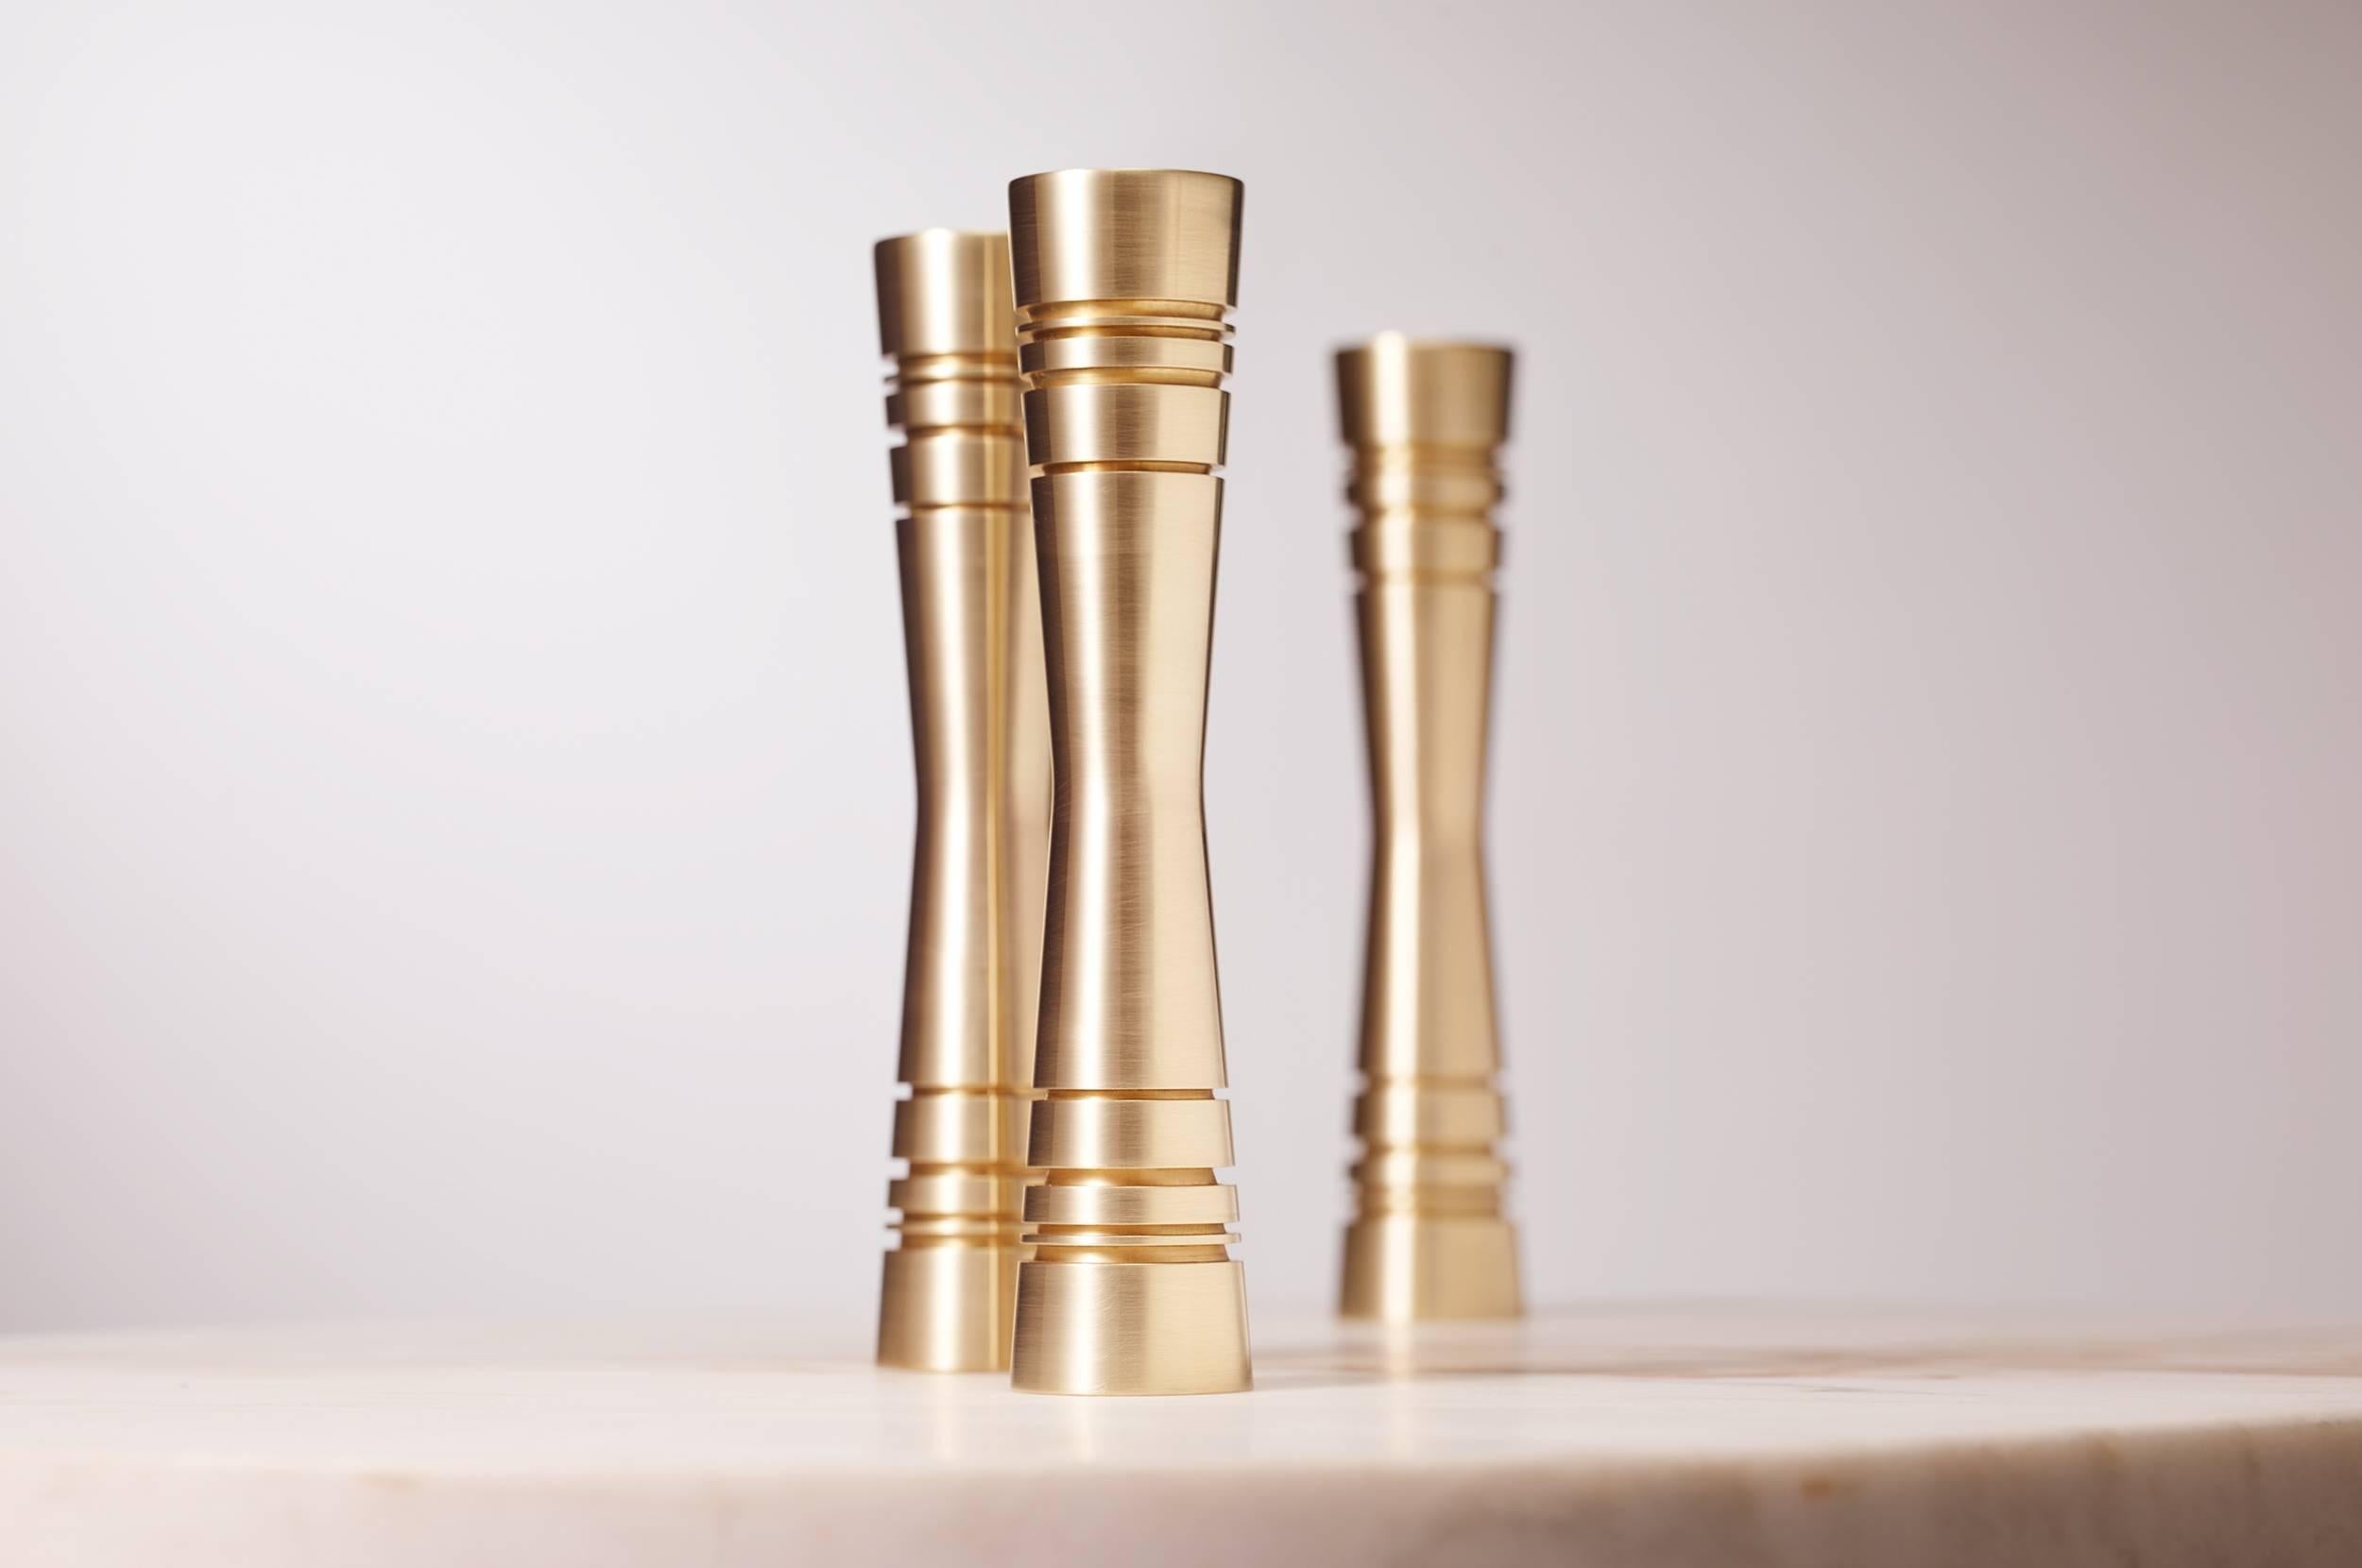 Post and Gleam's Double Taper candleholders are created from custom-milled solid brass accented with modern touches. Designed to become future heirlooms, adorning your home for generations. 
Mix and match to create your perfect midcentury inspired